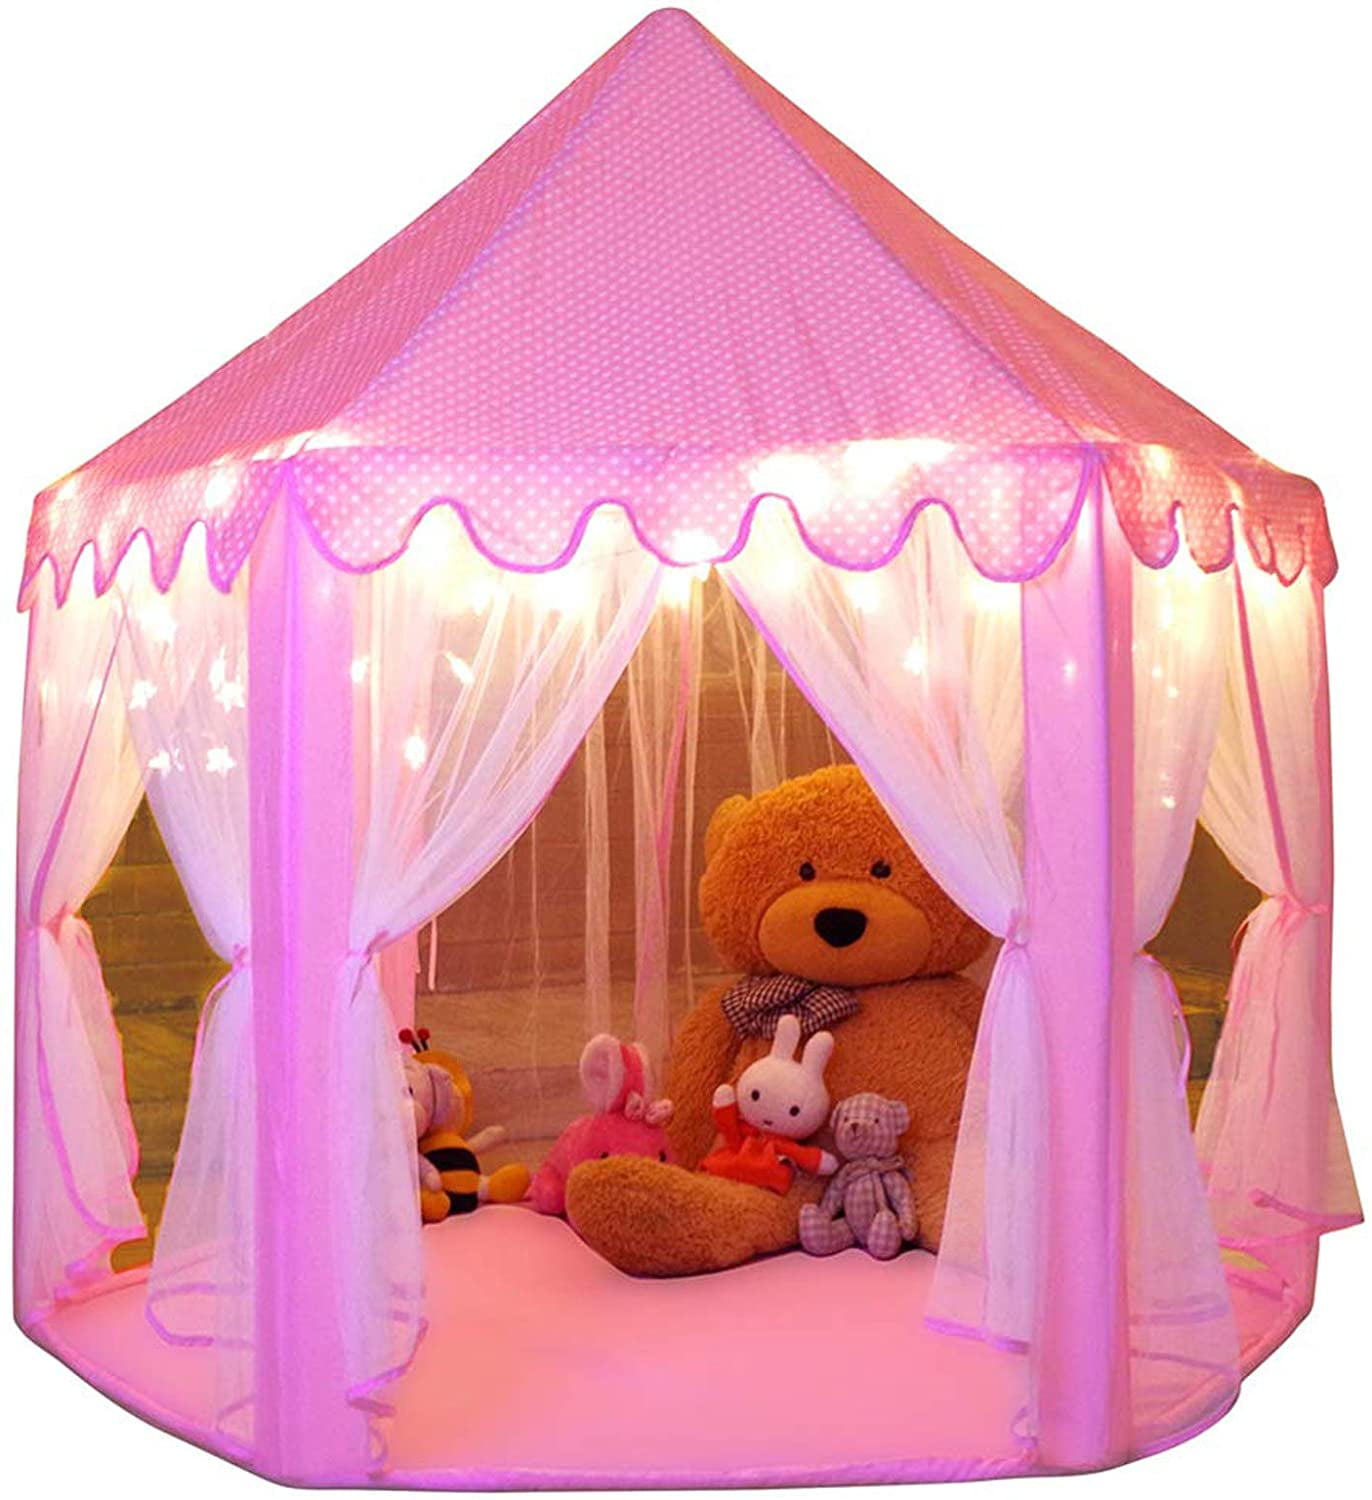 Pink Princess Castle Play House Children Fun Netting Outdoor Kids Play Tent 